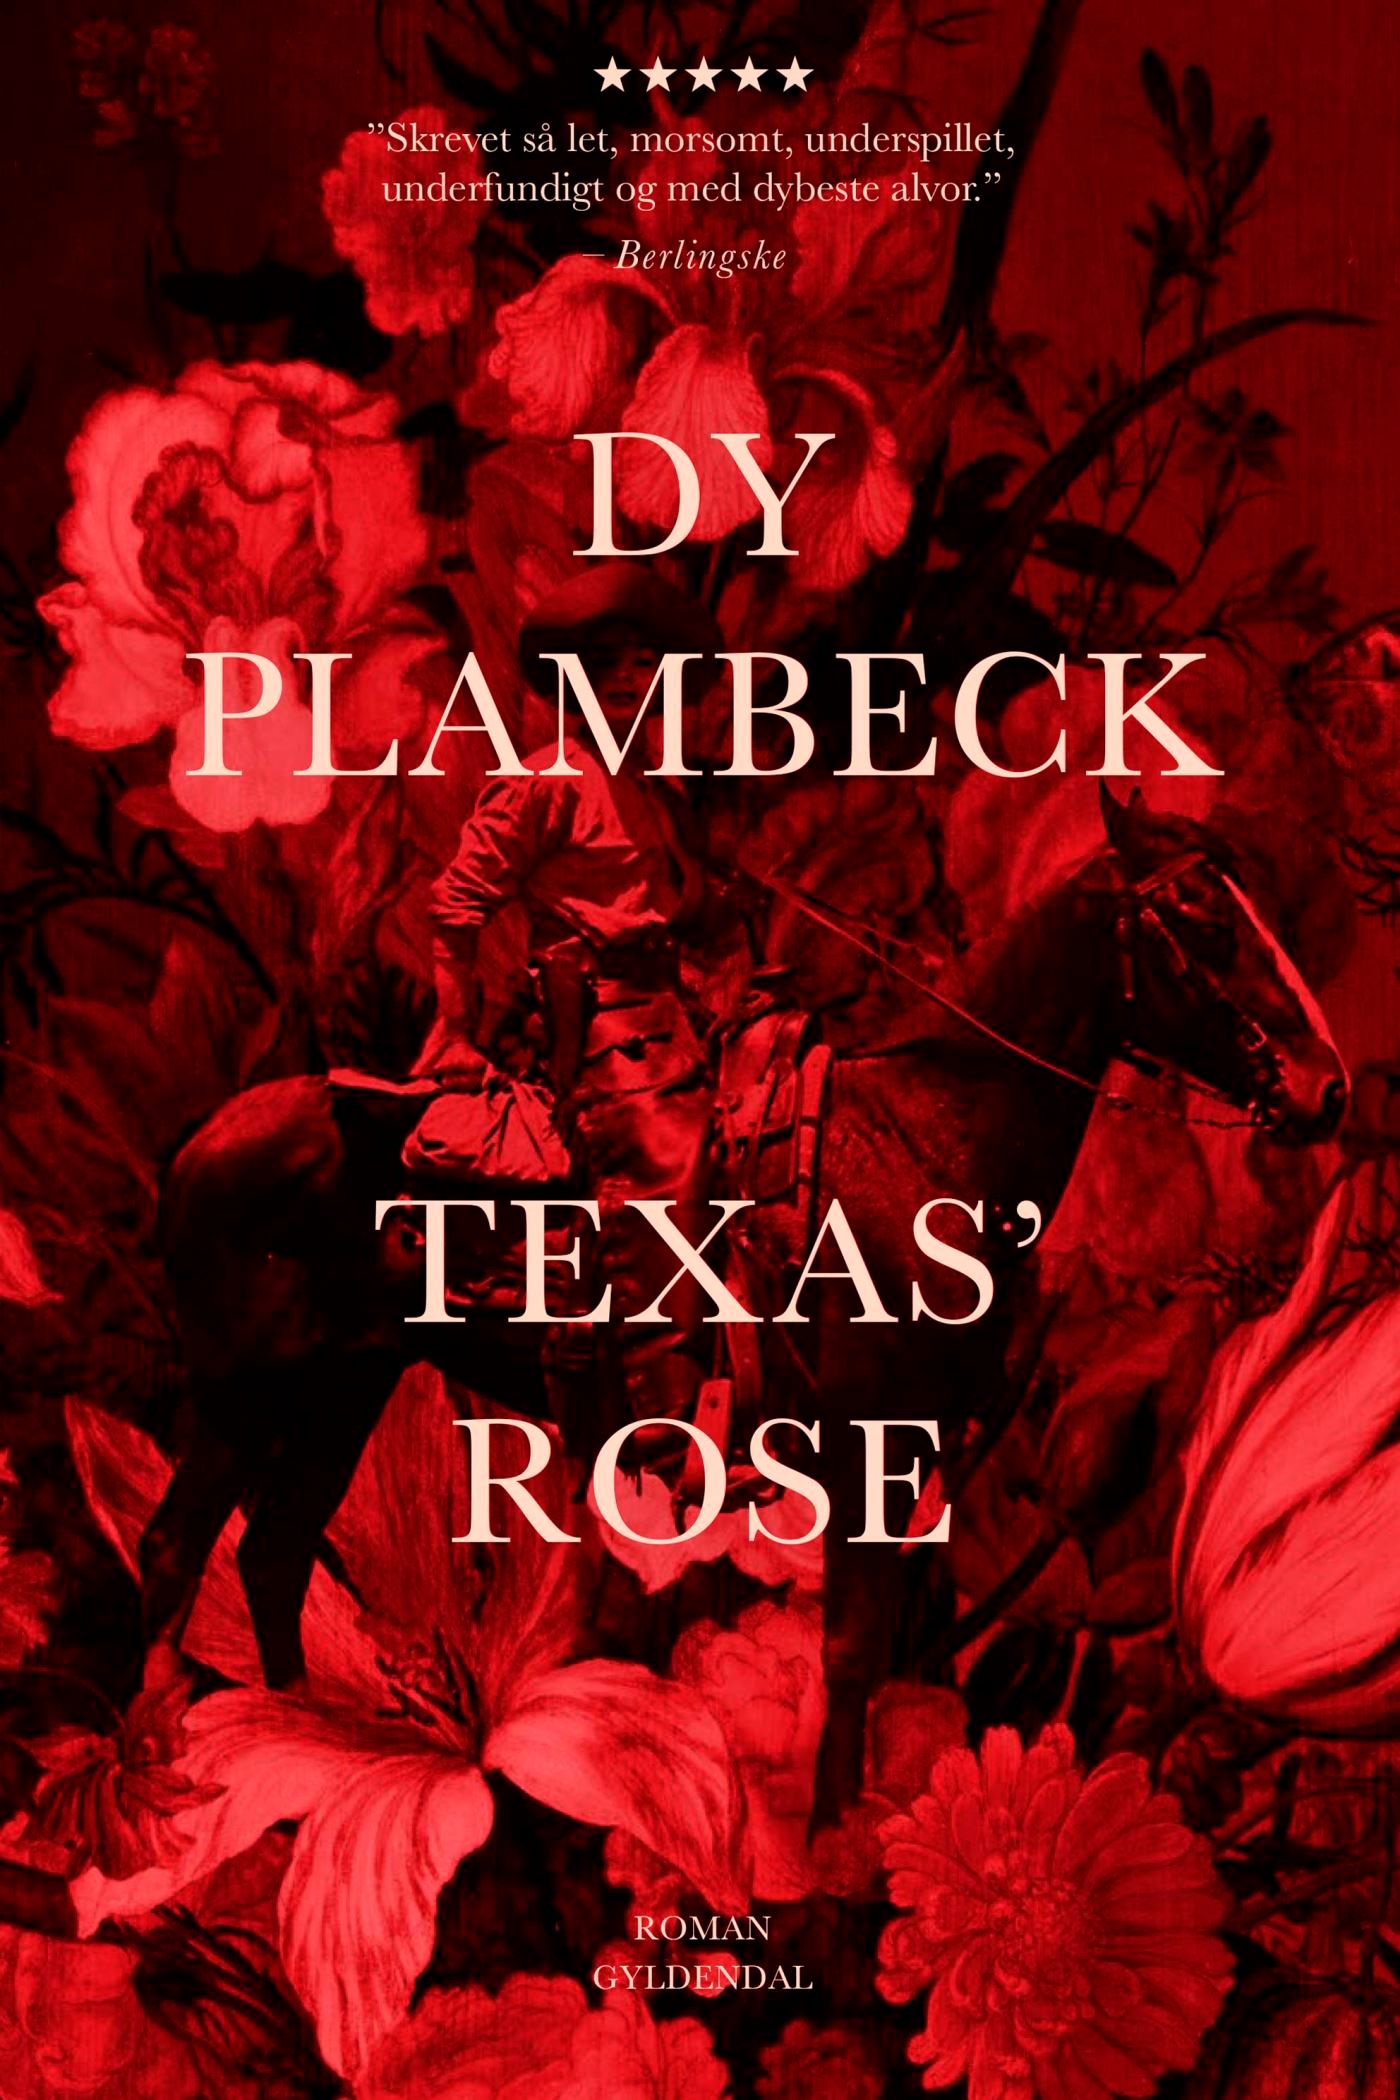 Texas' rose, eBook by Dy Plambeck